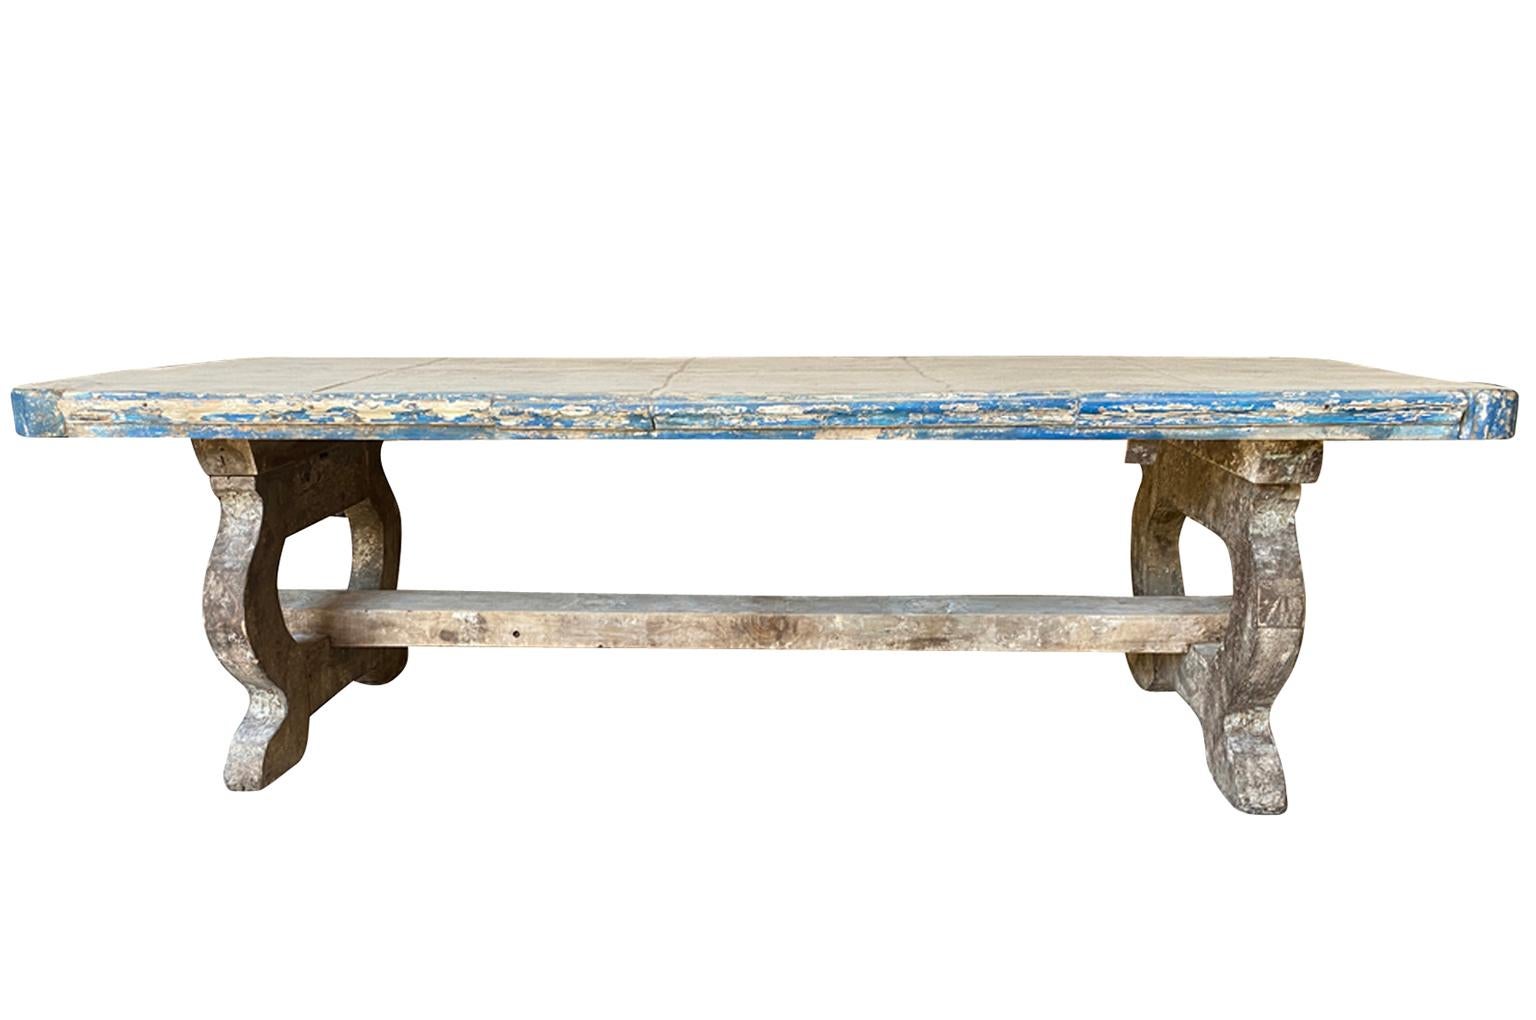 Painted Italian 18th Century Dining Table, Presentation Table